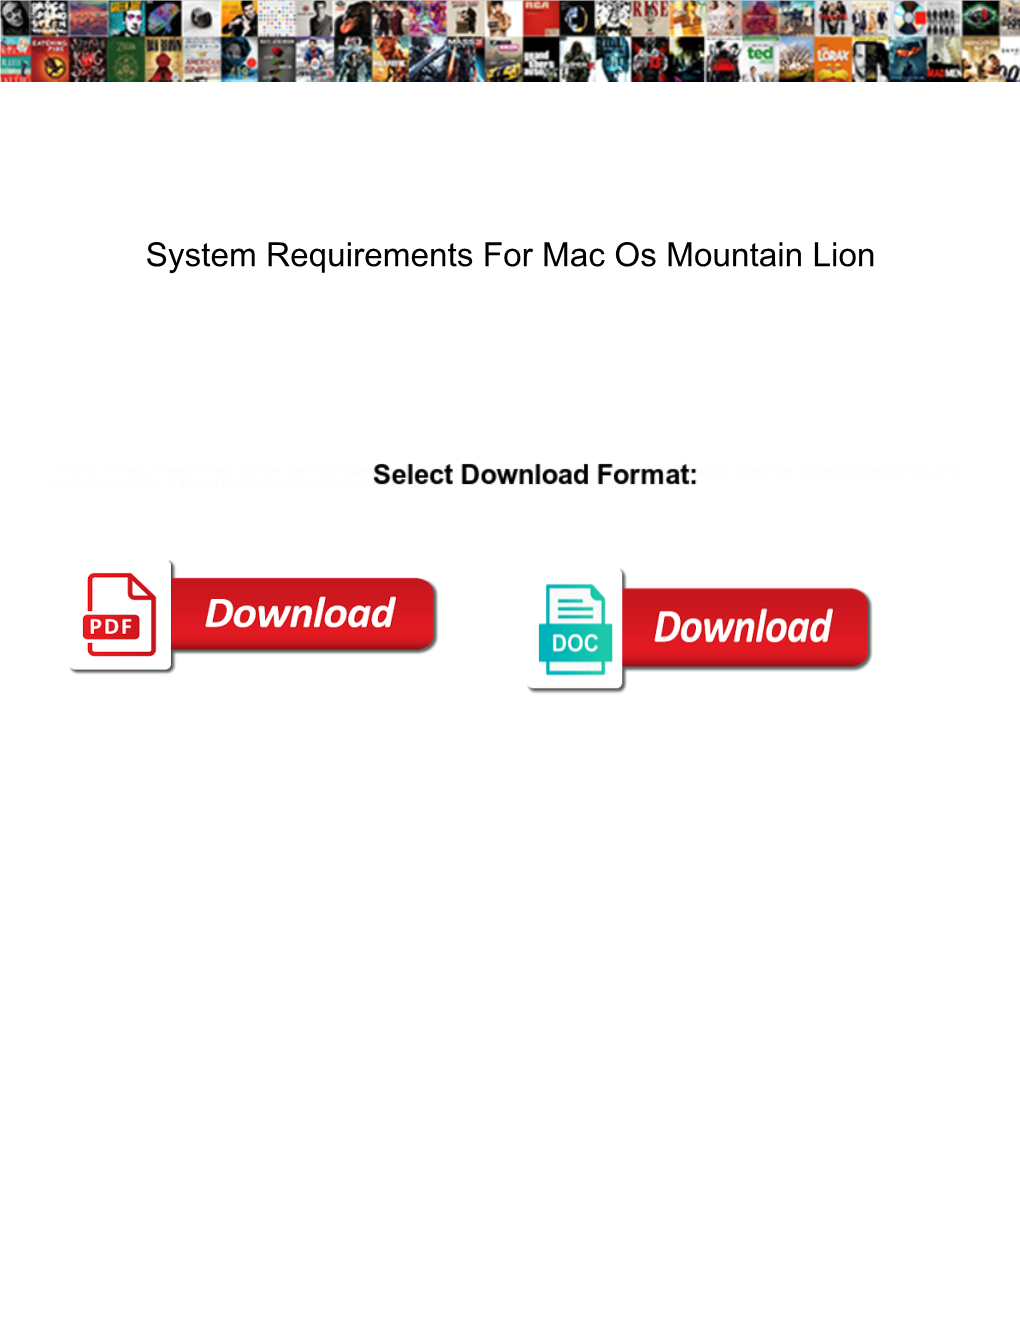 System Requirements for Mac Os Mountain Lion